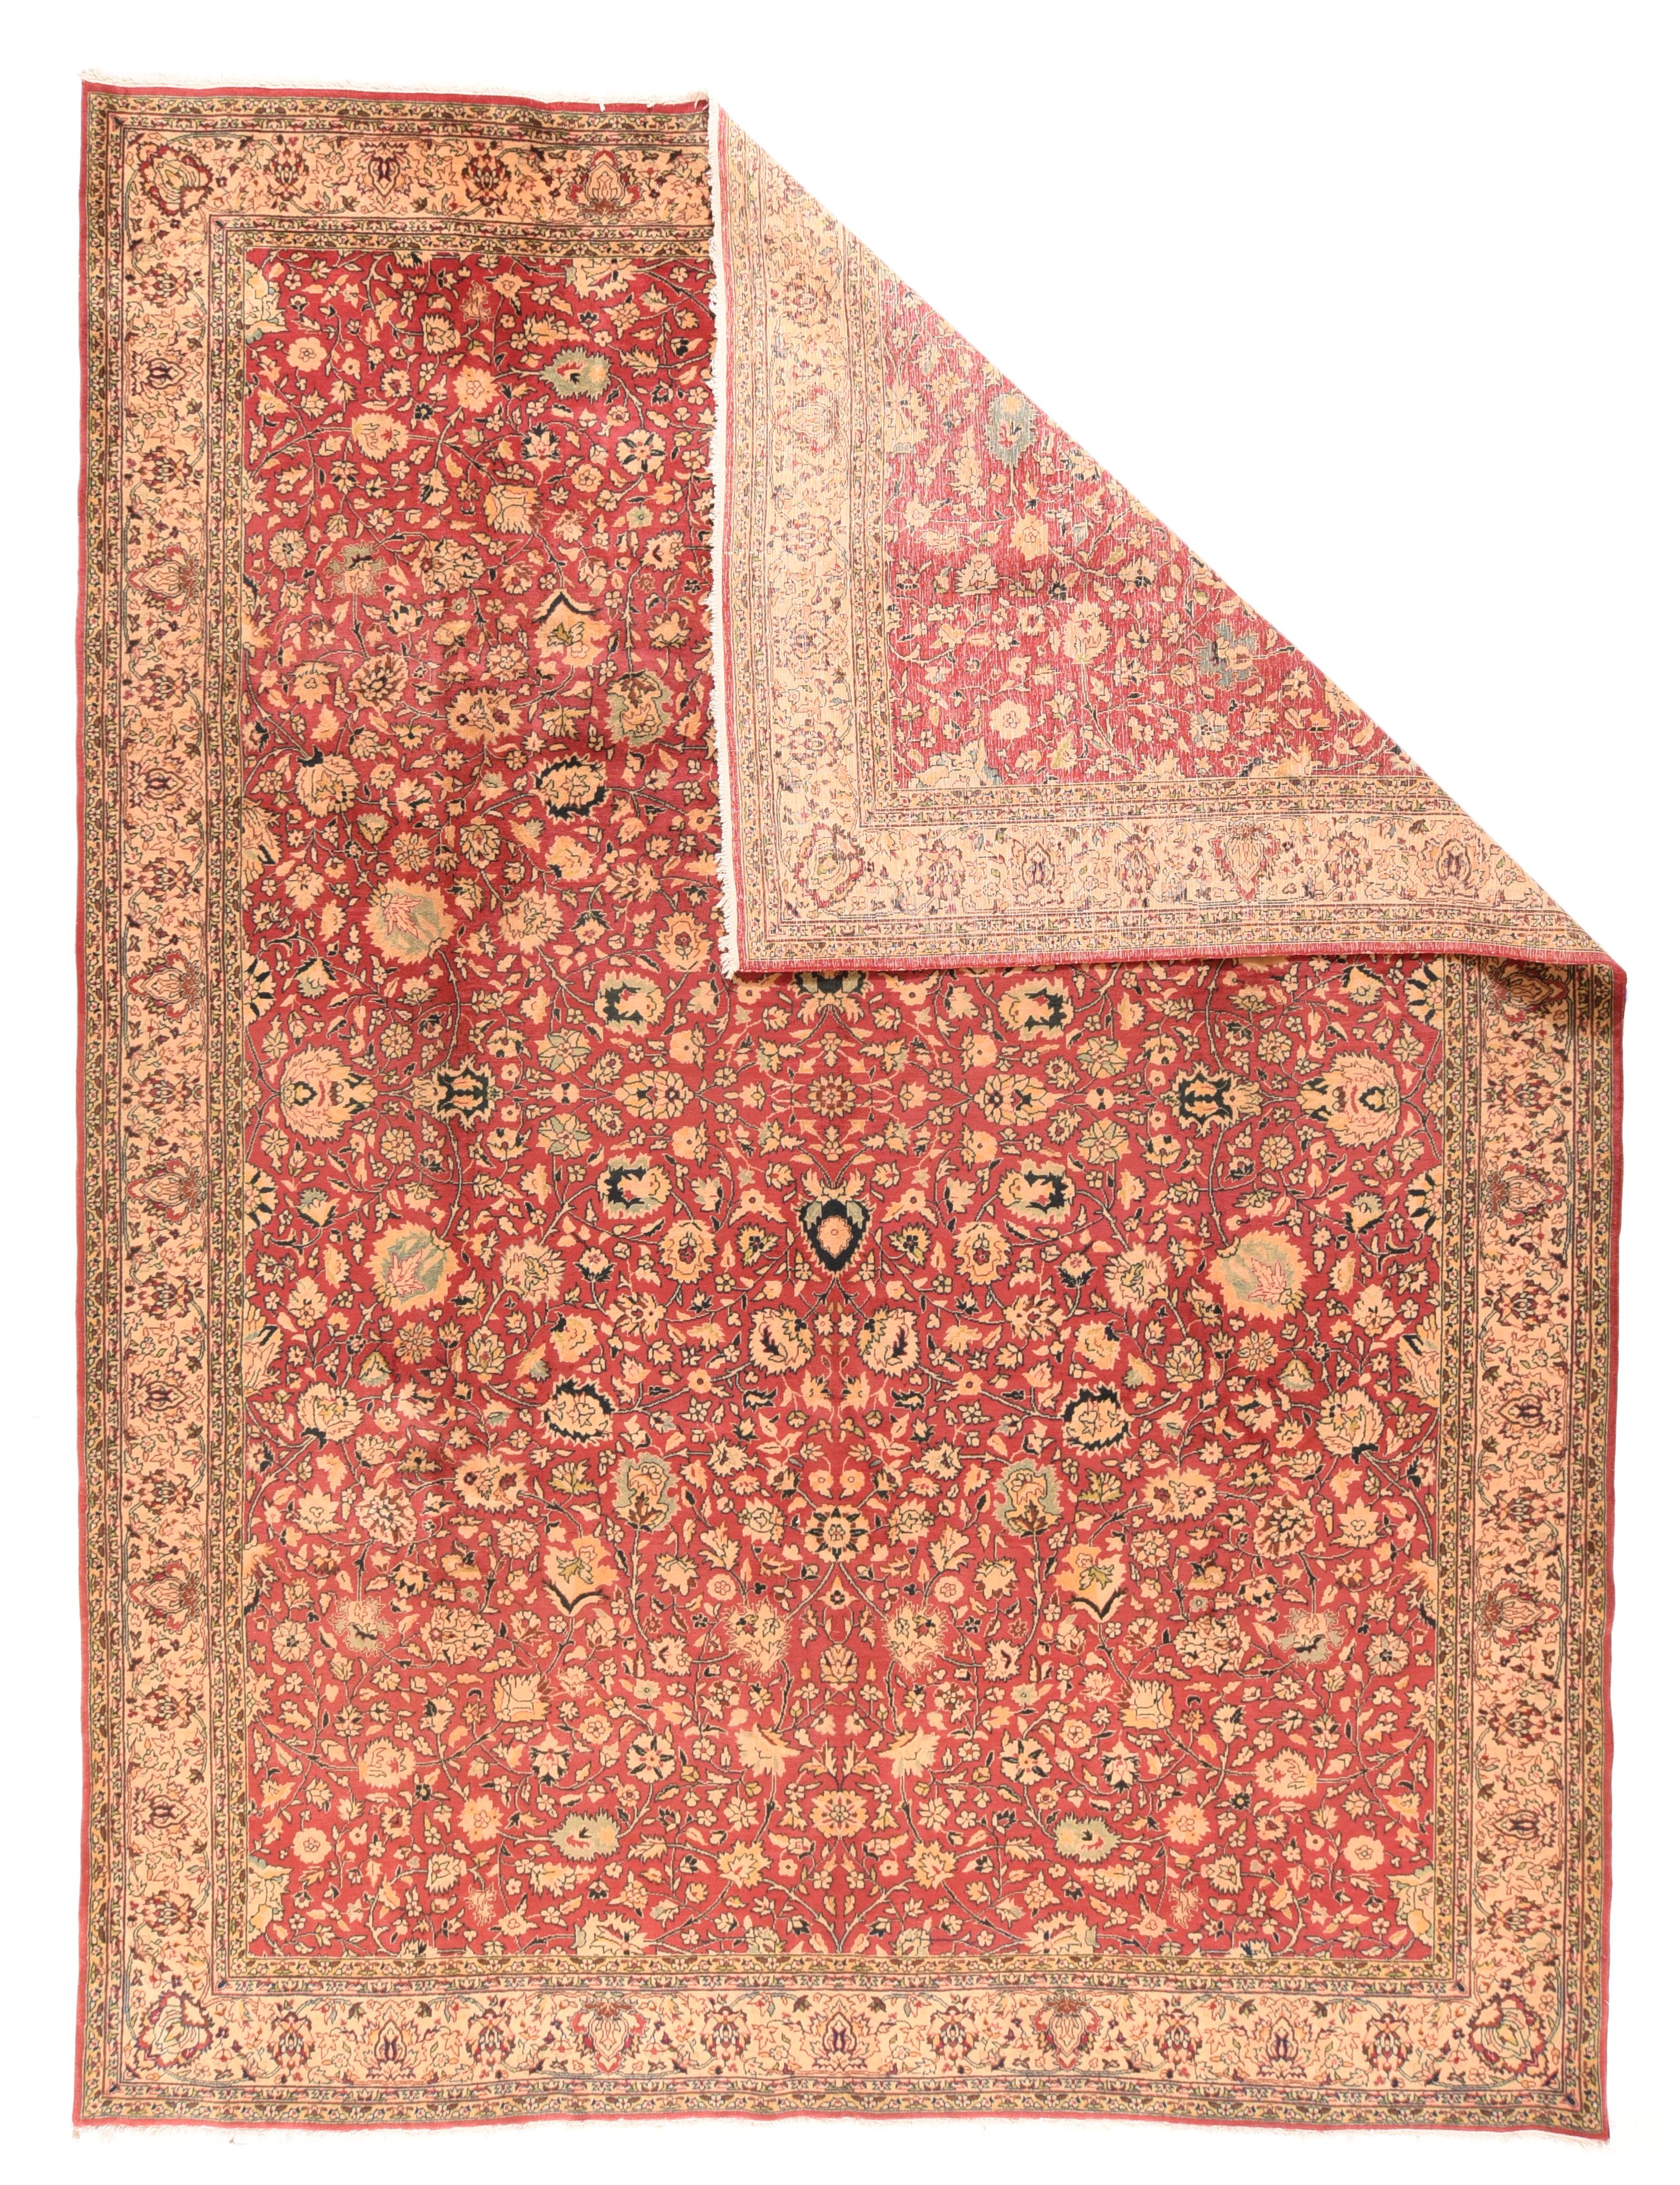 Vintage Tabriz rug 8'6'' x 11'. Totally in the classical Persian style, this well-woven urban piece shows a slightly varied red field supporting a close allover pattern of golden palmettes, leaves and two levels of coiling vinery. Near black